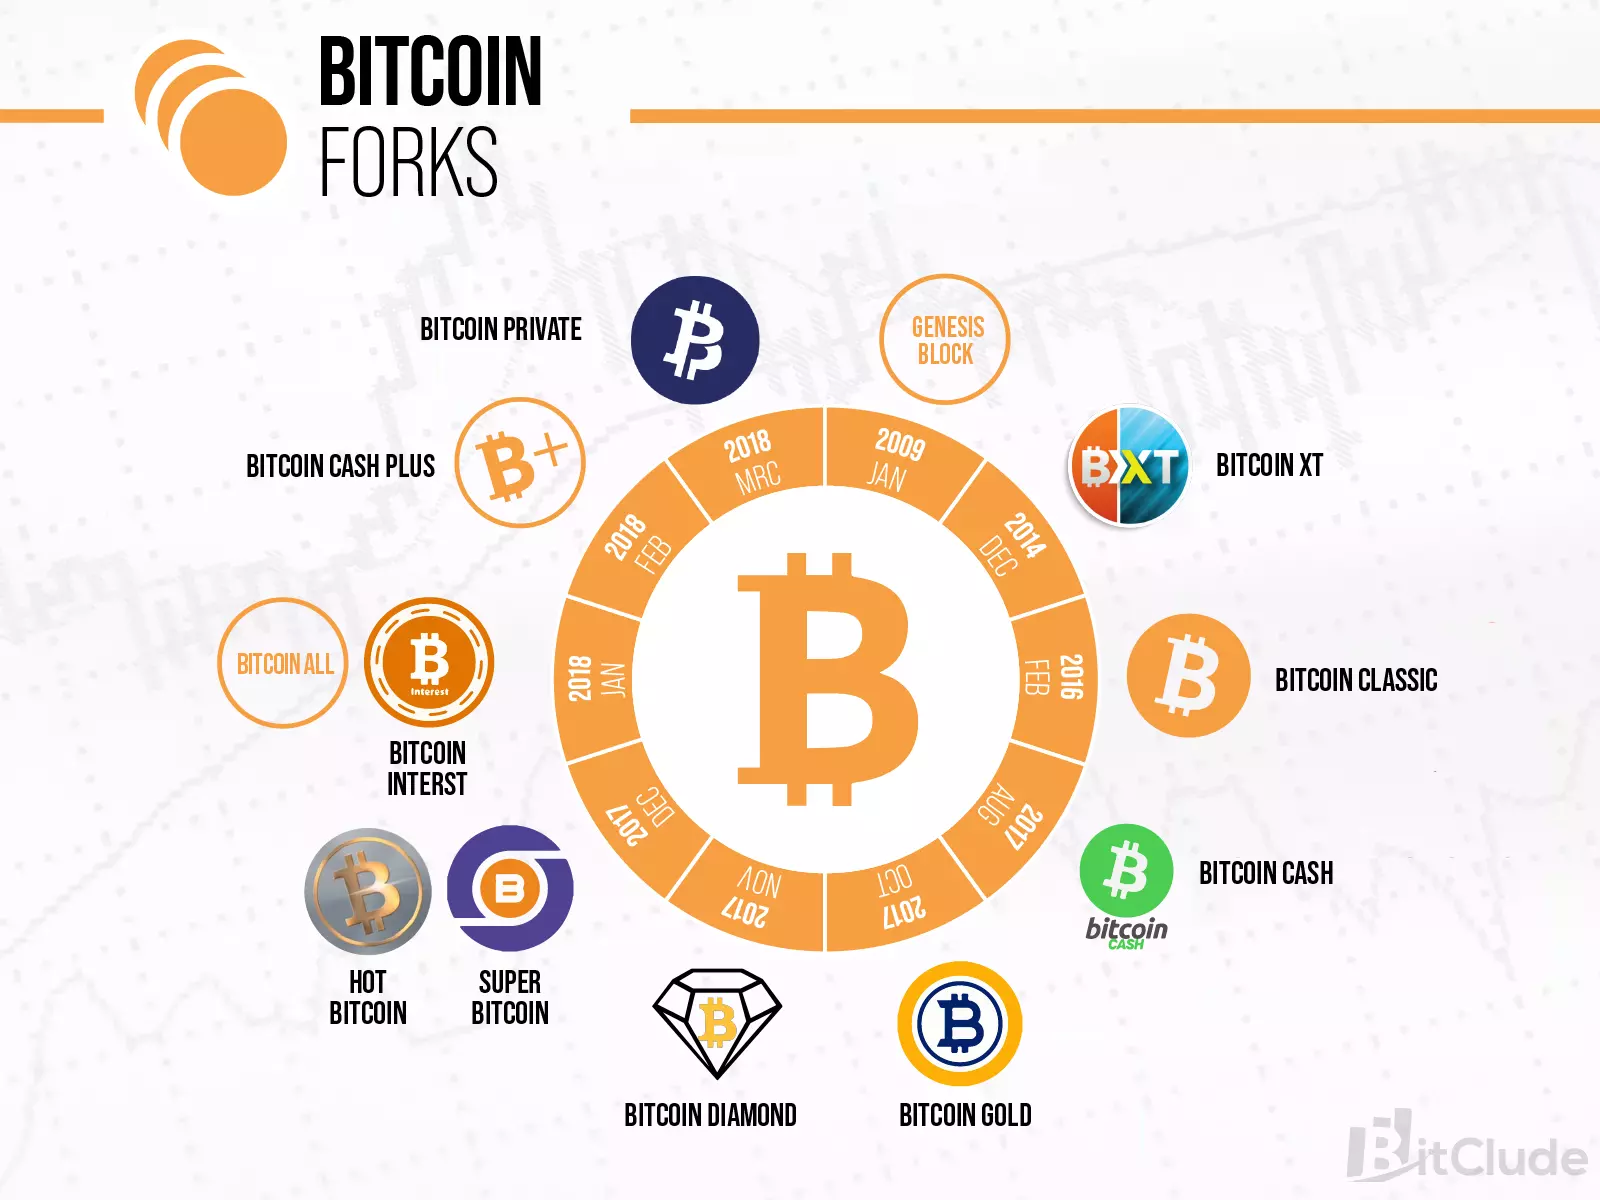 From time to time, Bitcoin goes through forks, during which new cryptocurrencies are created based on the main network.